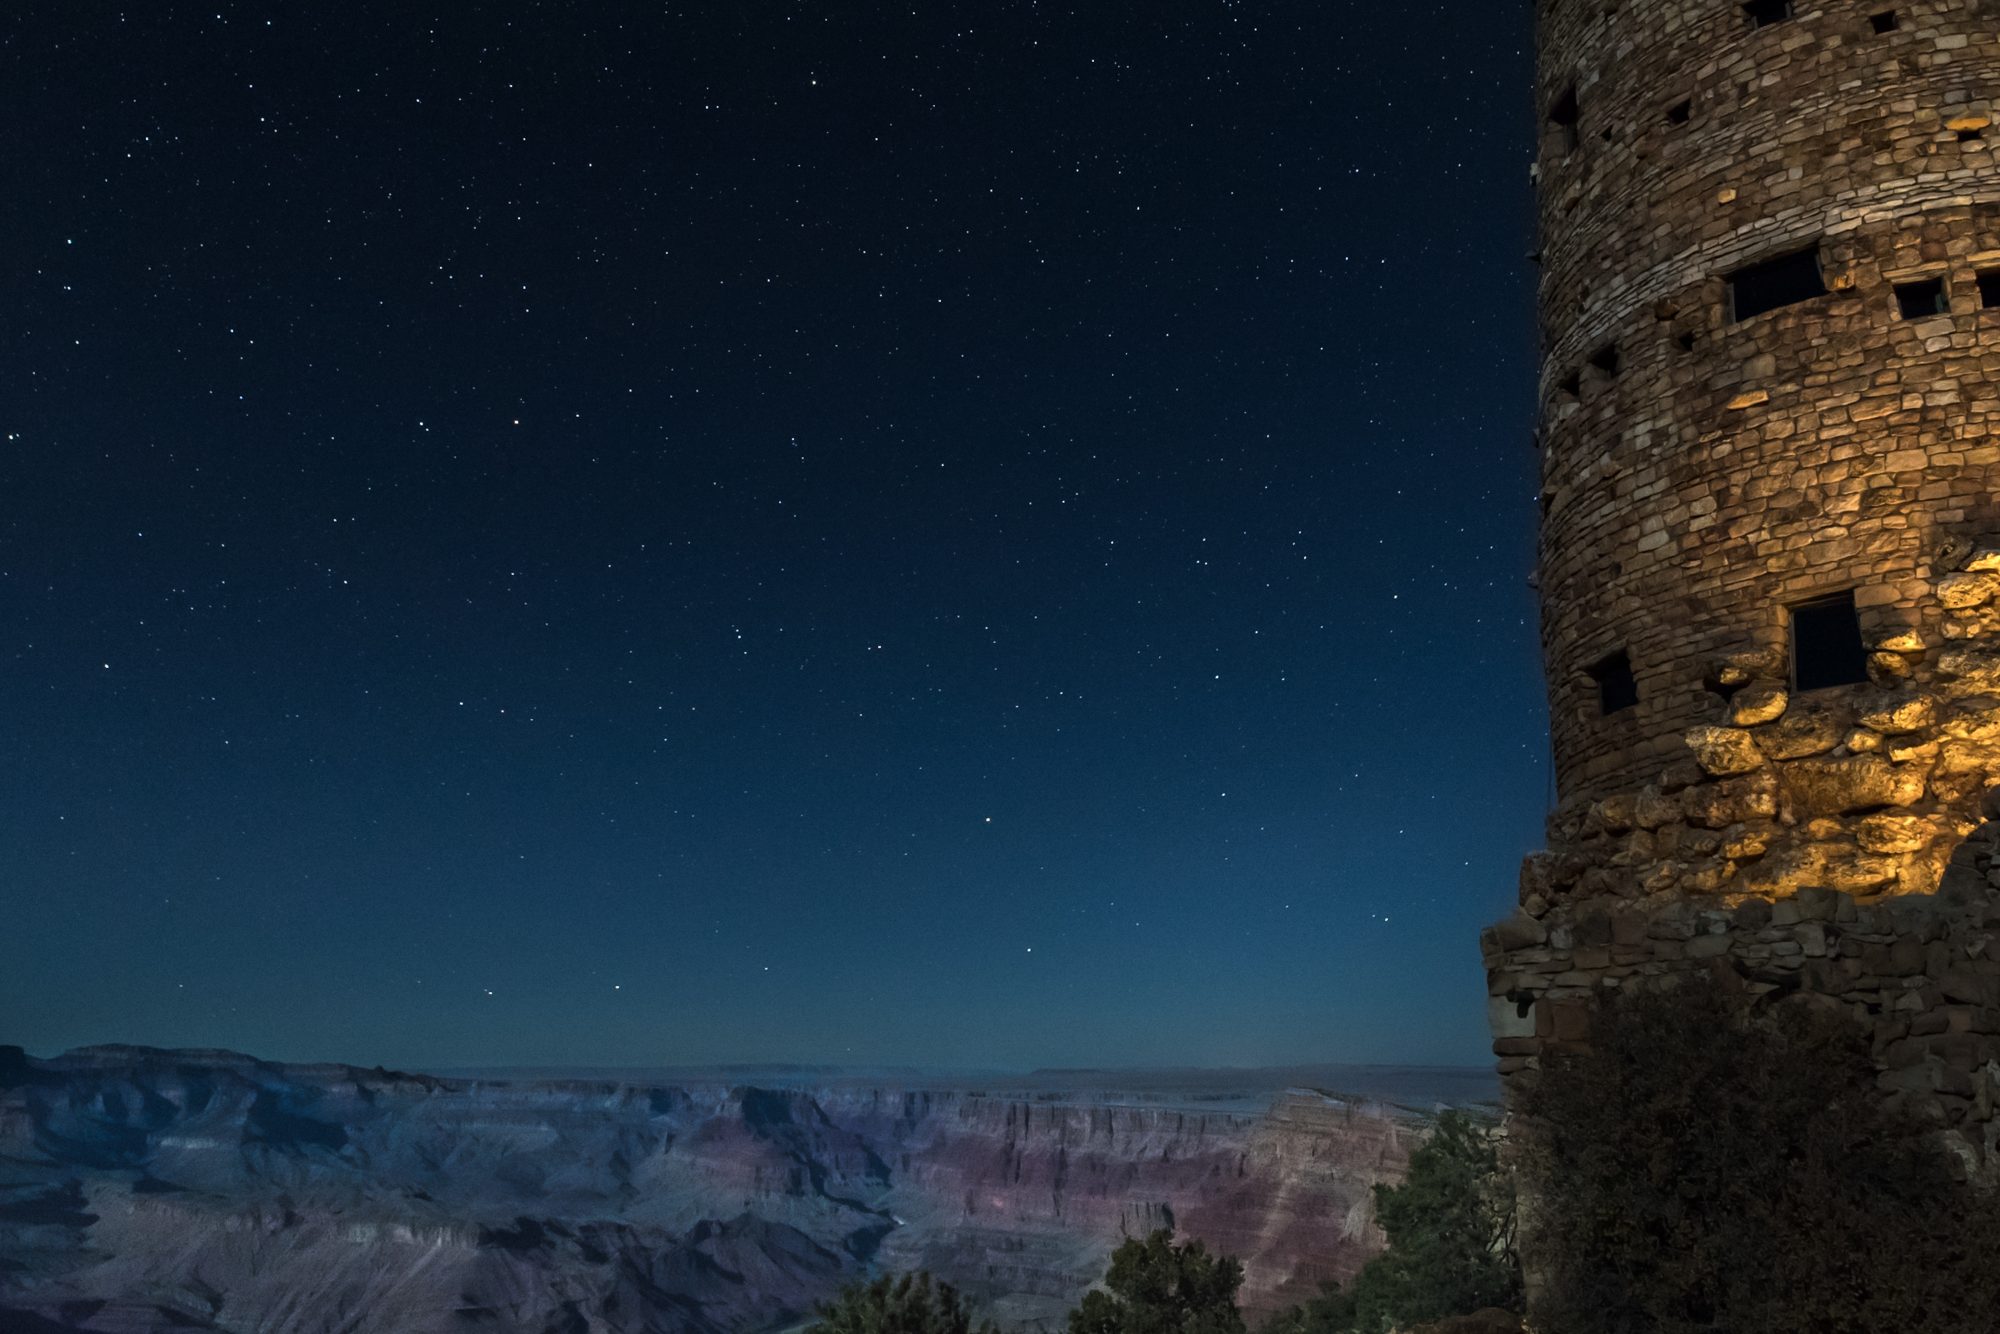 Grand Canyon Watch Tower in the middle of the night